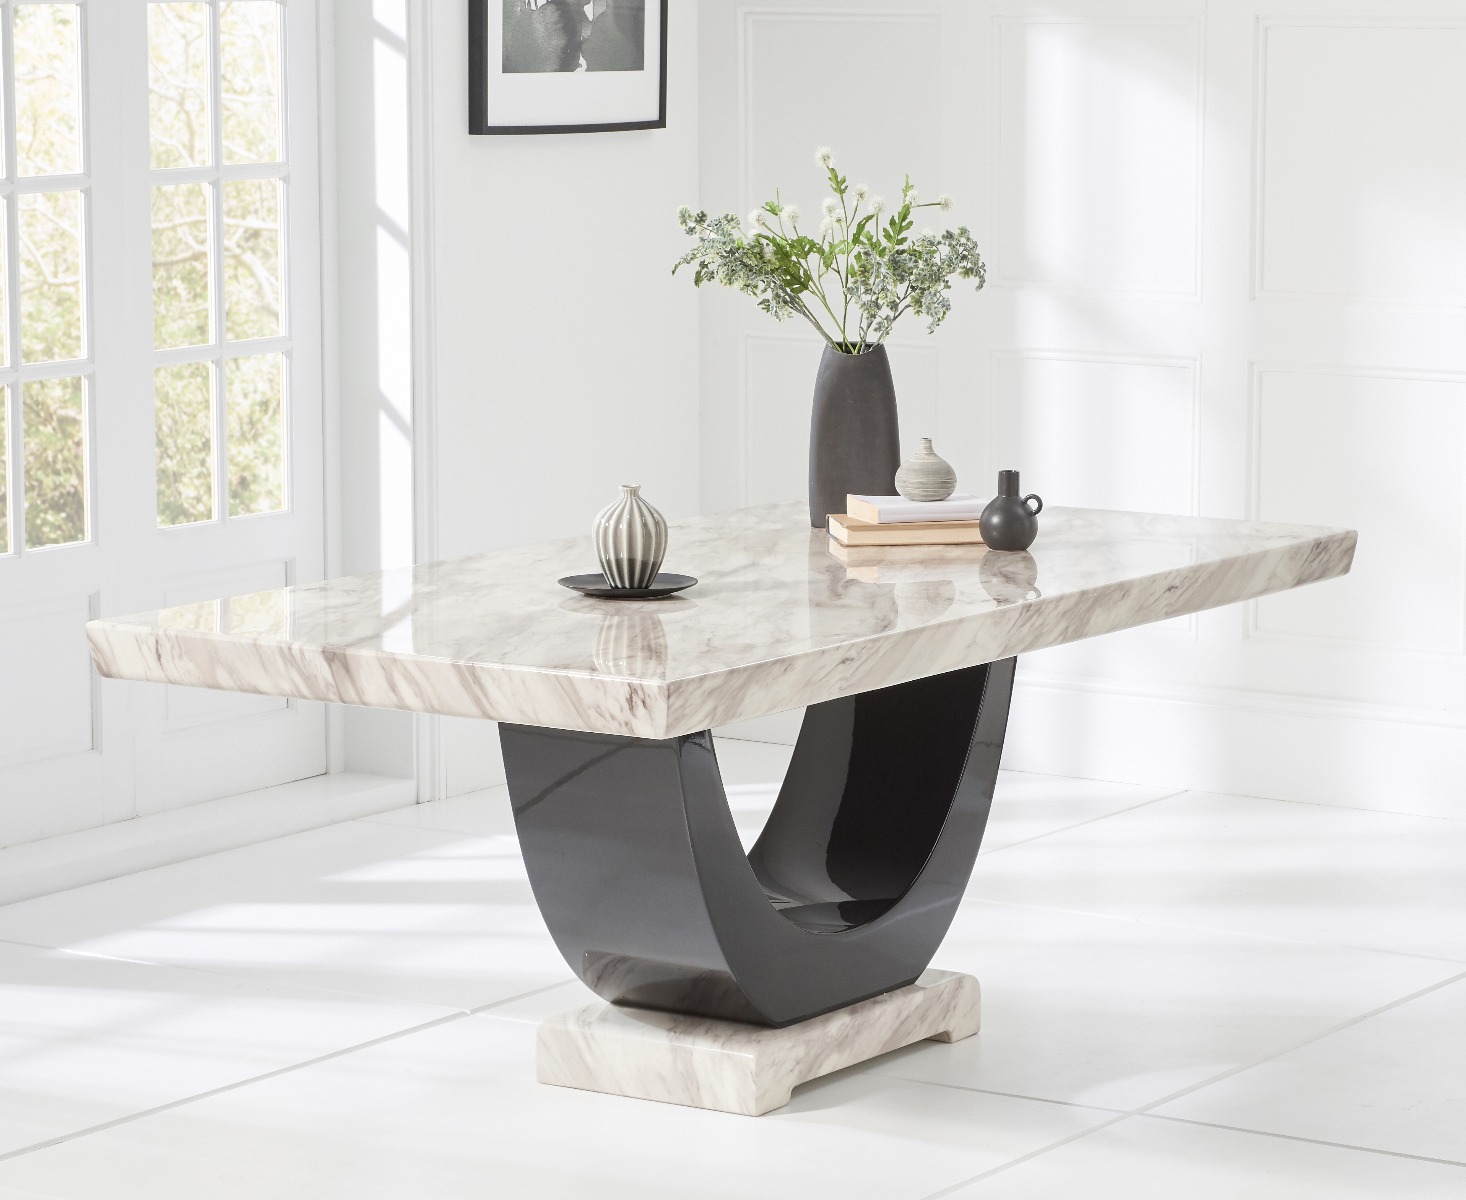 Photo 4 of Novara 200cm cream and black pedestal marble dining table with 10 cream sophia chairs